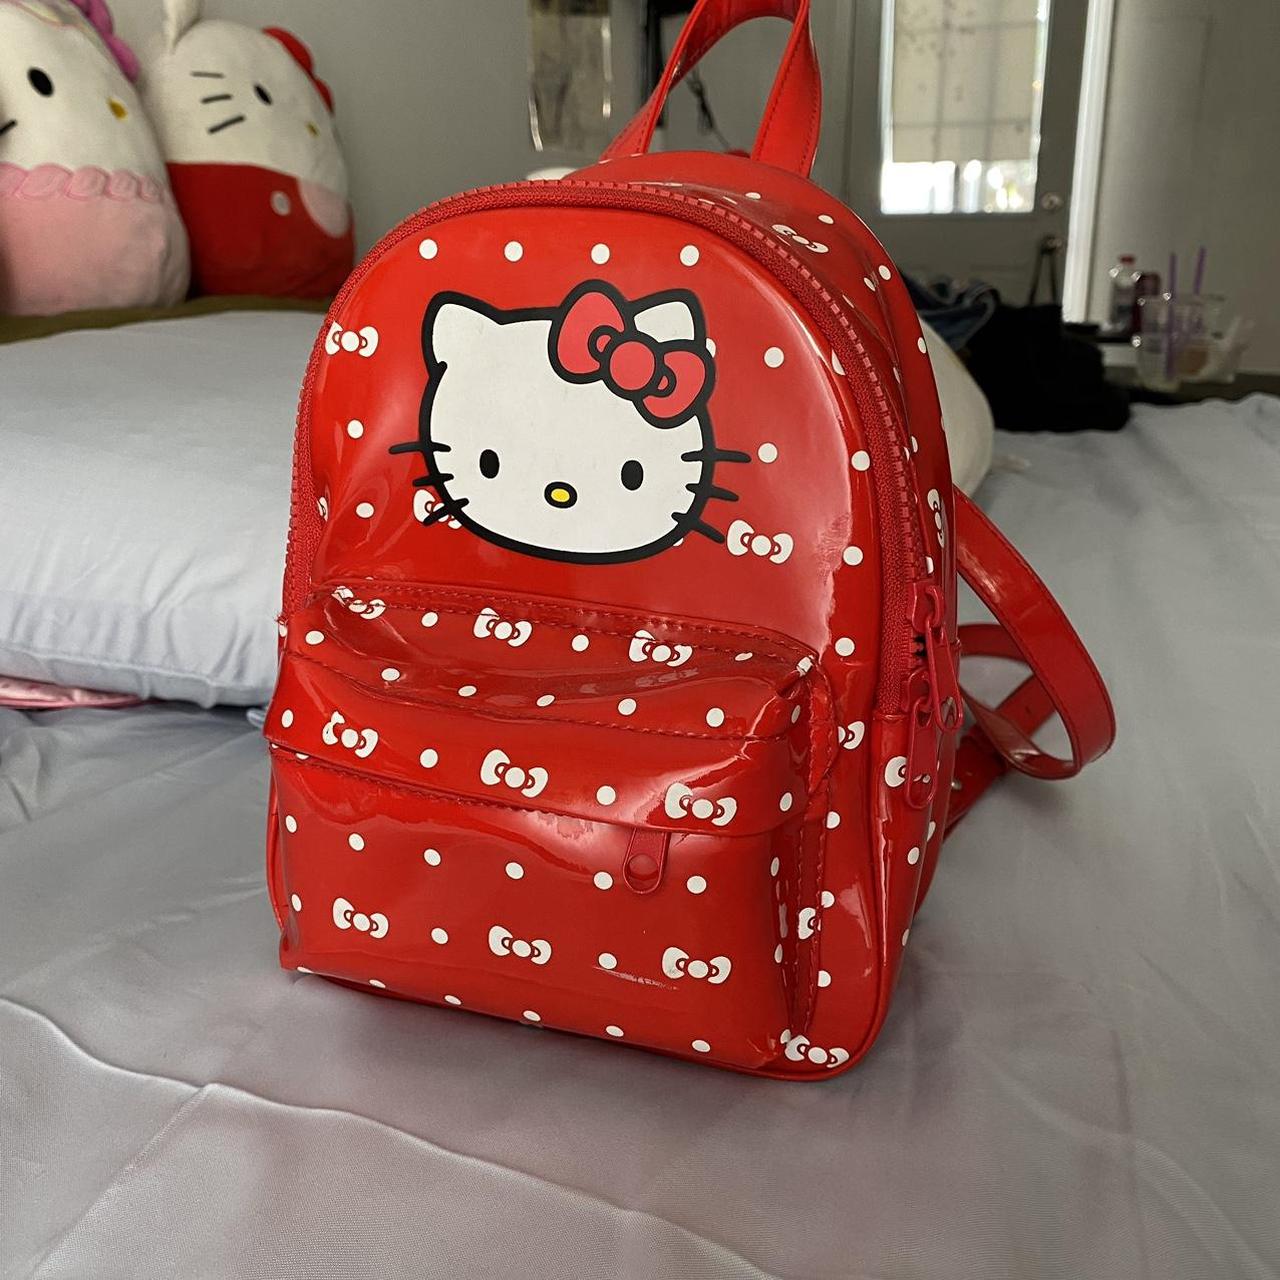 Mall goth inspired hello kitty backpack—> available on depop or dm to  purchase✨💖 peep the details and her adorable dress💕 #Sanrio…